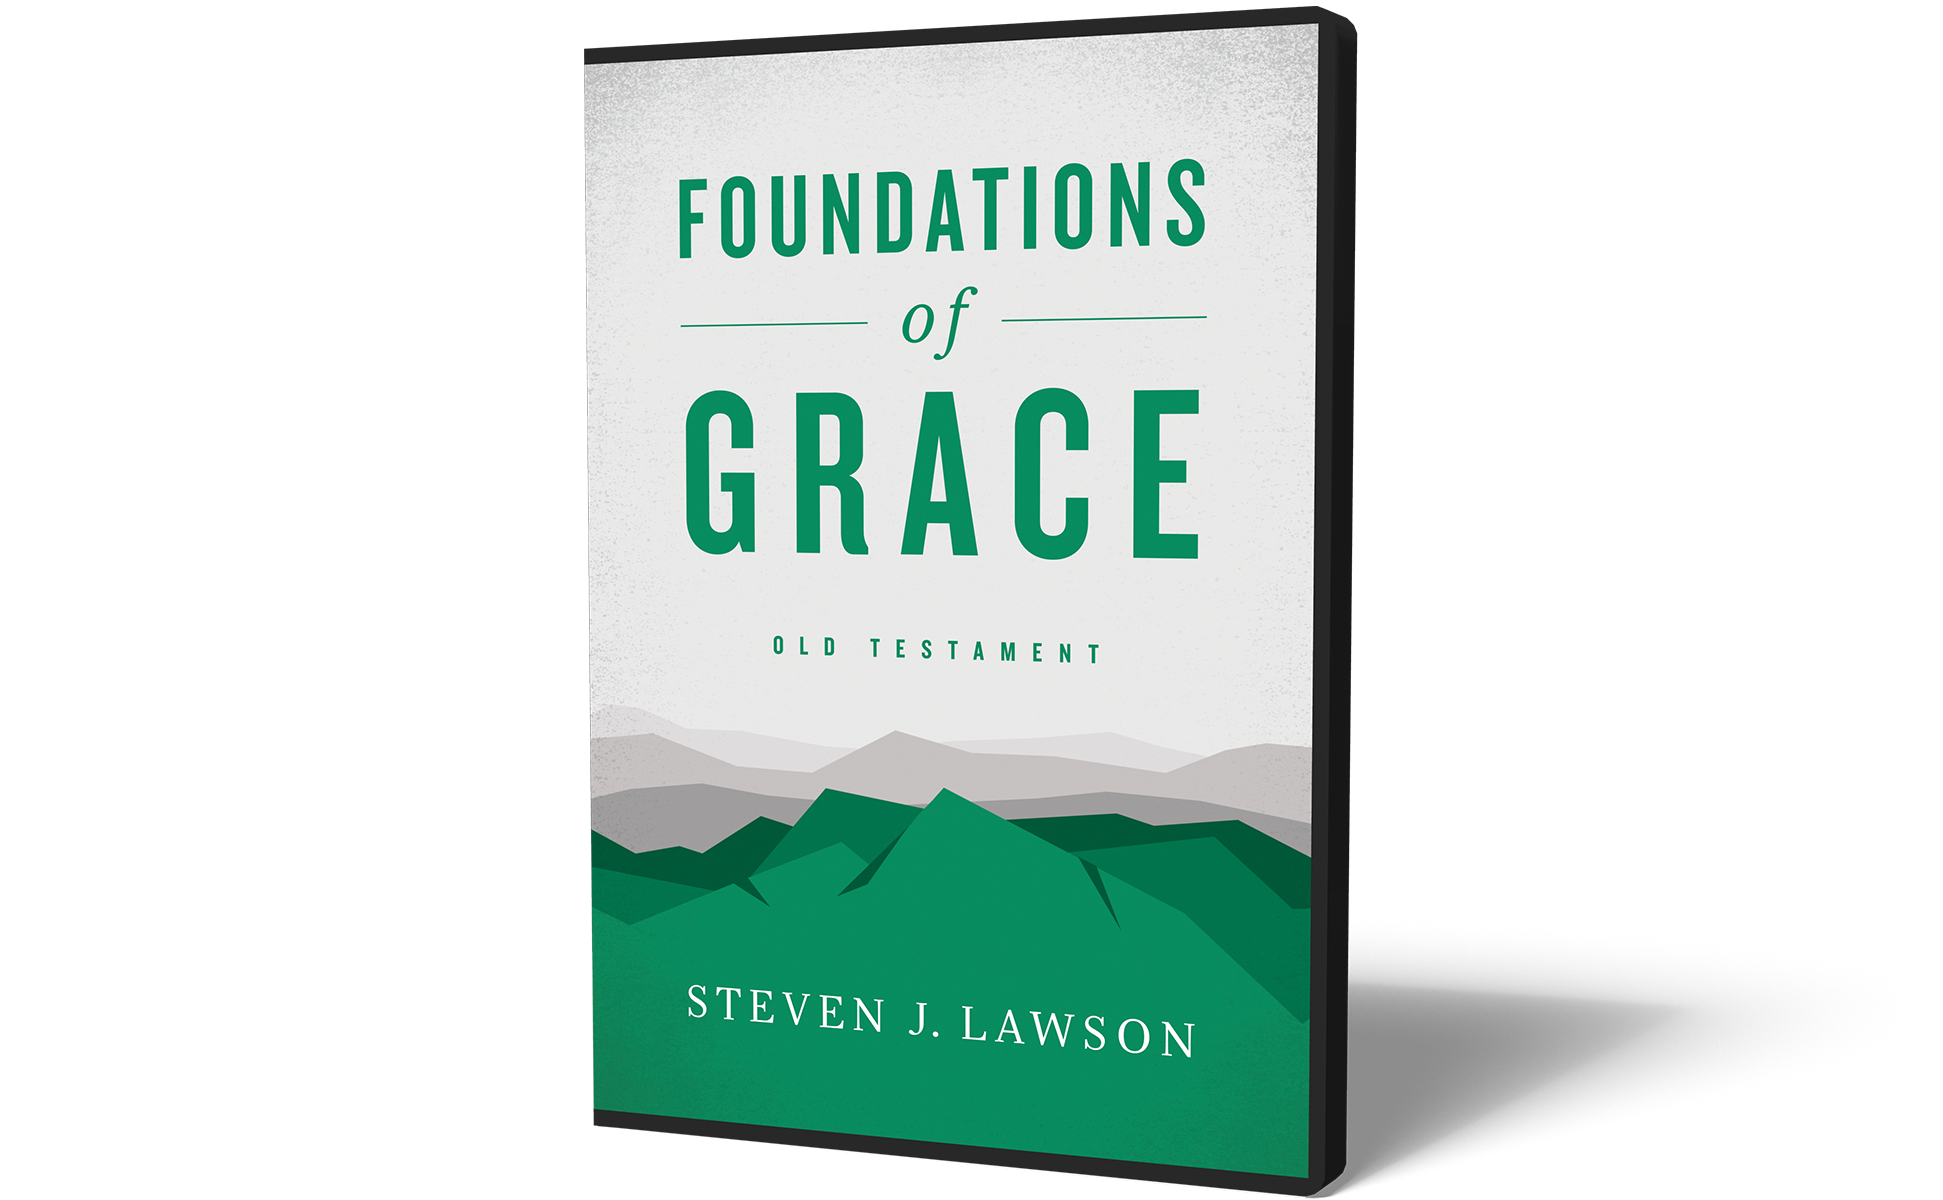 Foundations of Grace: Old Testament